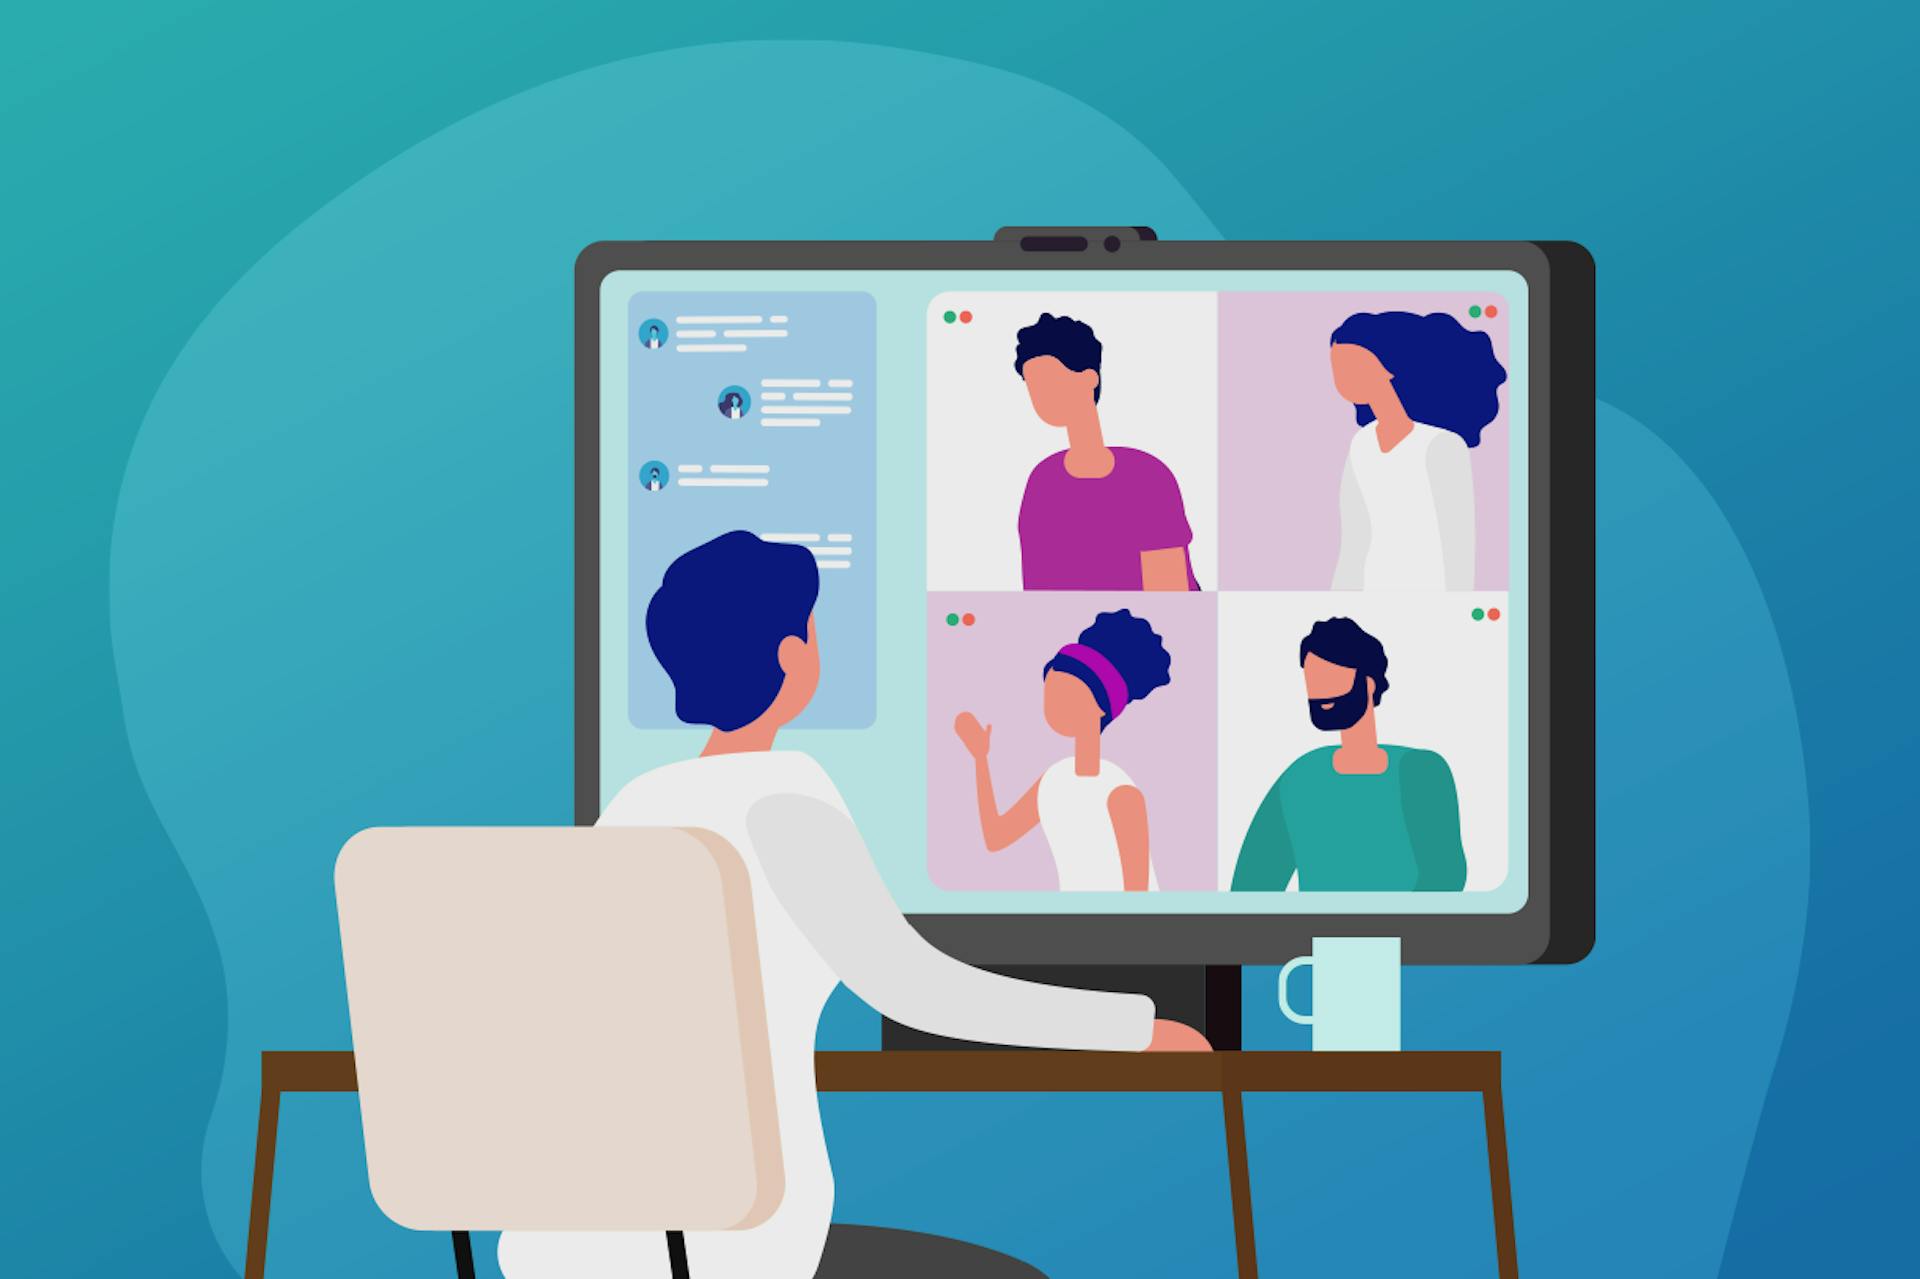 Illustration of a person in a virtual meeting against a blue background